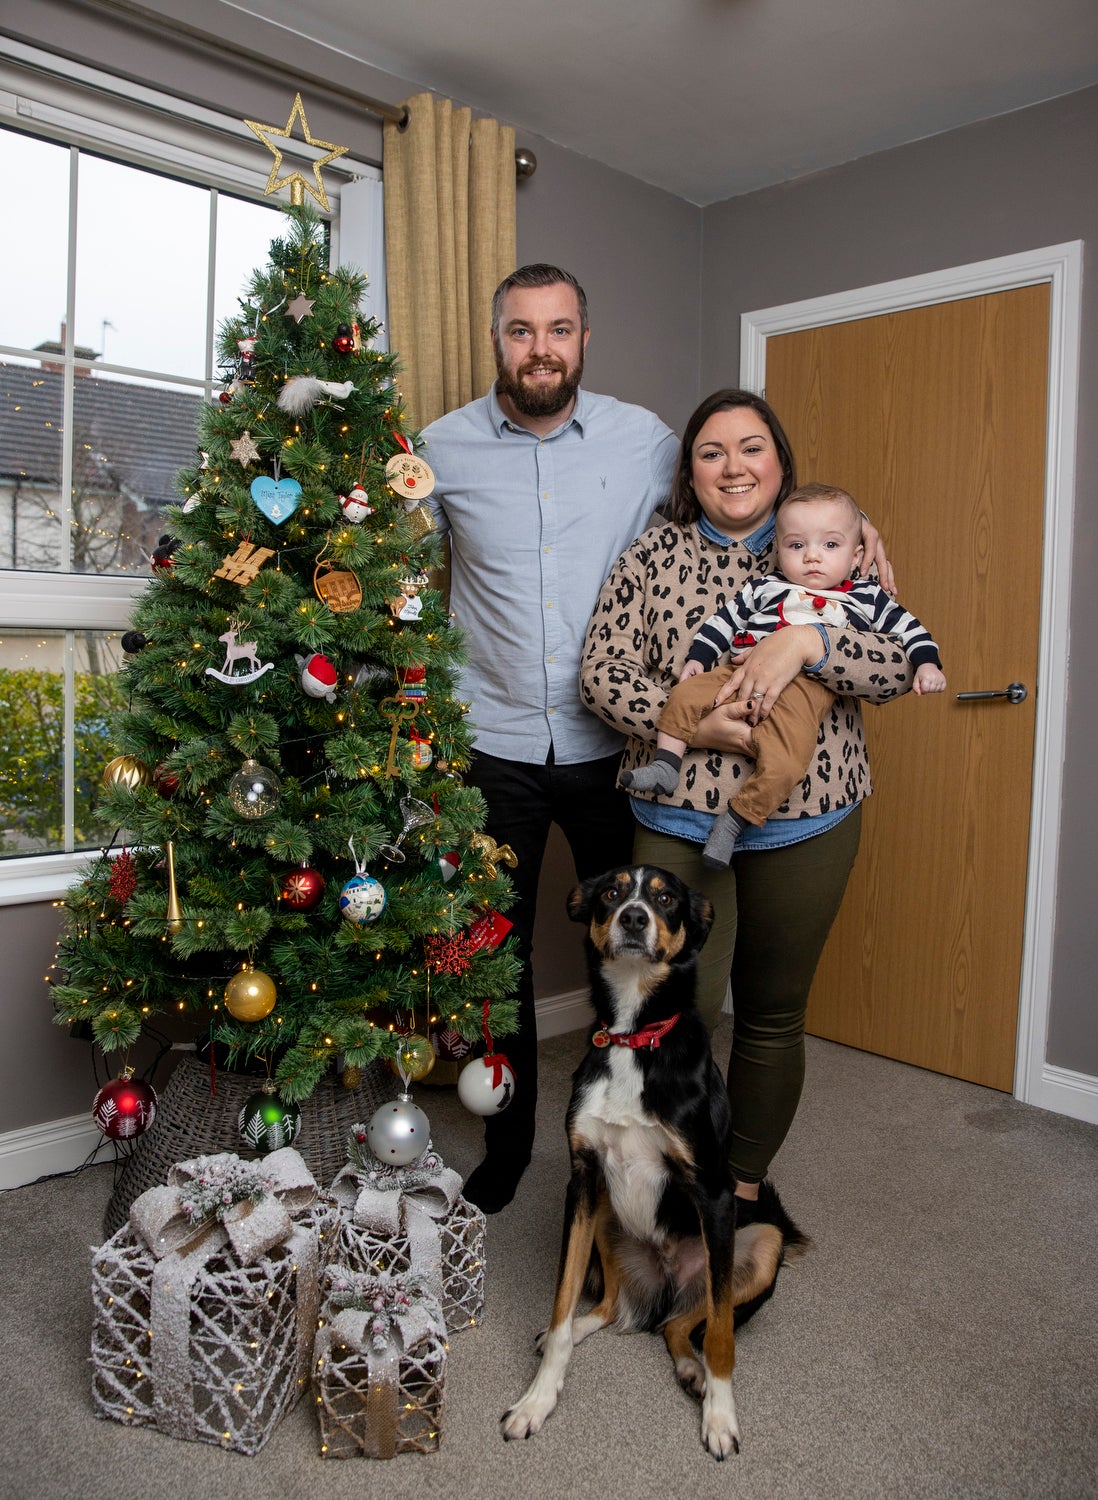 Martin and Gillian Johnston with their son Robert “Robbie’ Johnston and their rescue dog Max at their home in Ballyclare, Northern Ireland. PA Photo. Picture date: Tuesday December 21 2021. See PA story ULSTER Baby. Photo credit should read: Liam McBurney/PA Wire